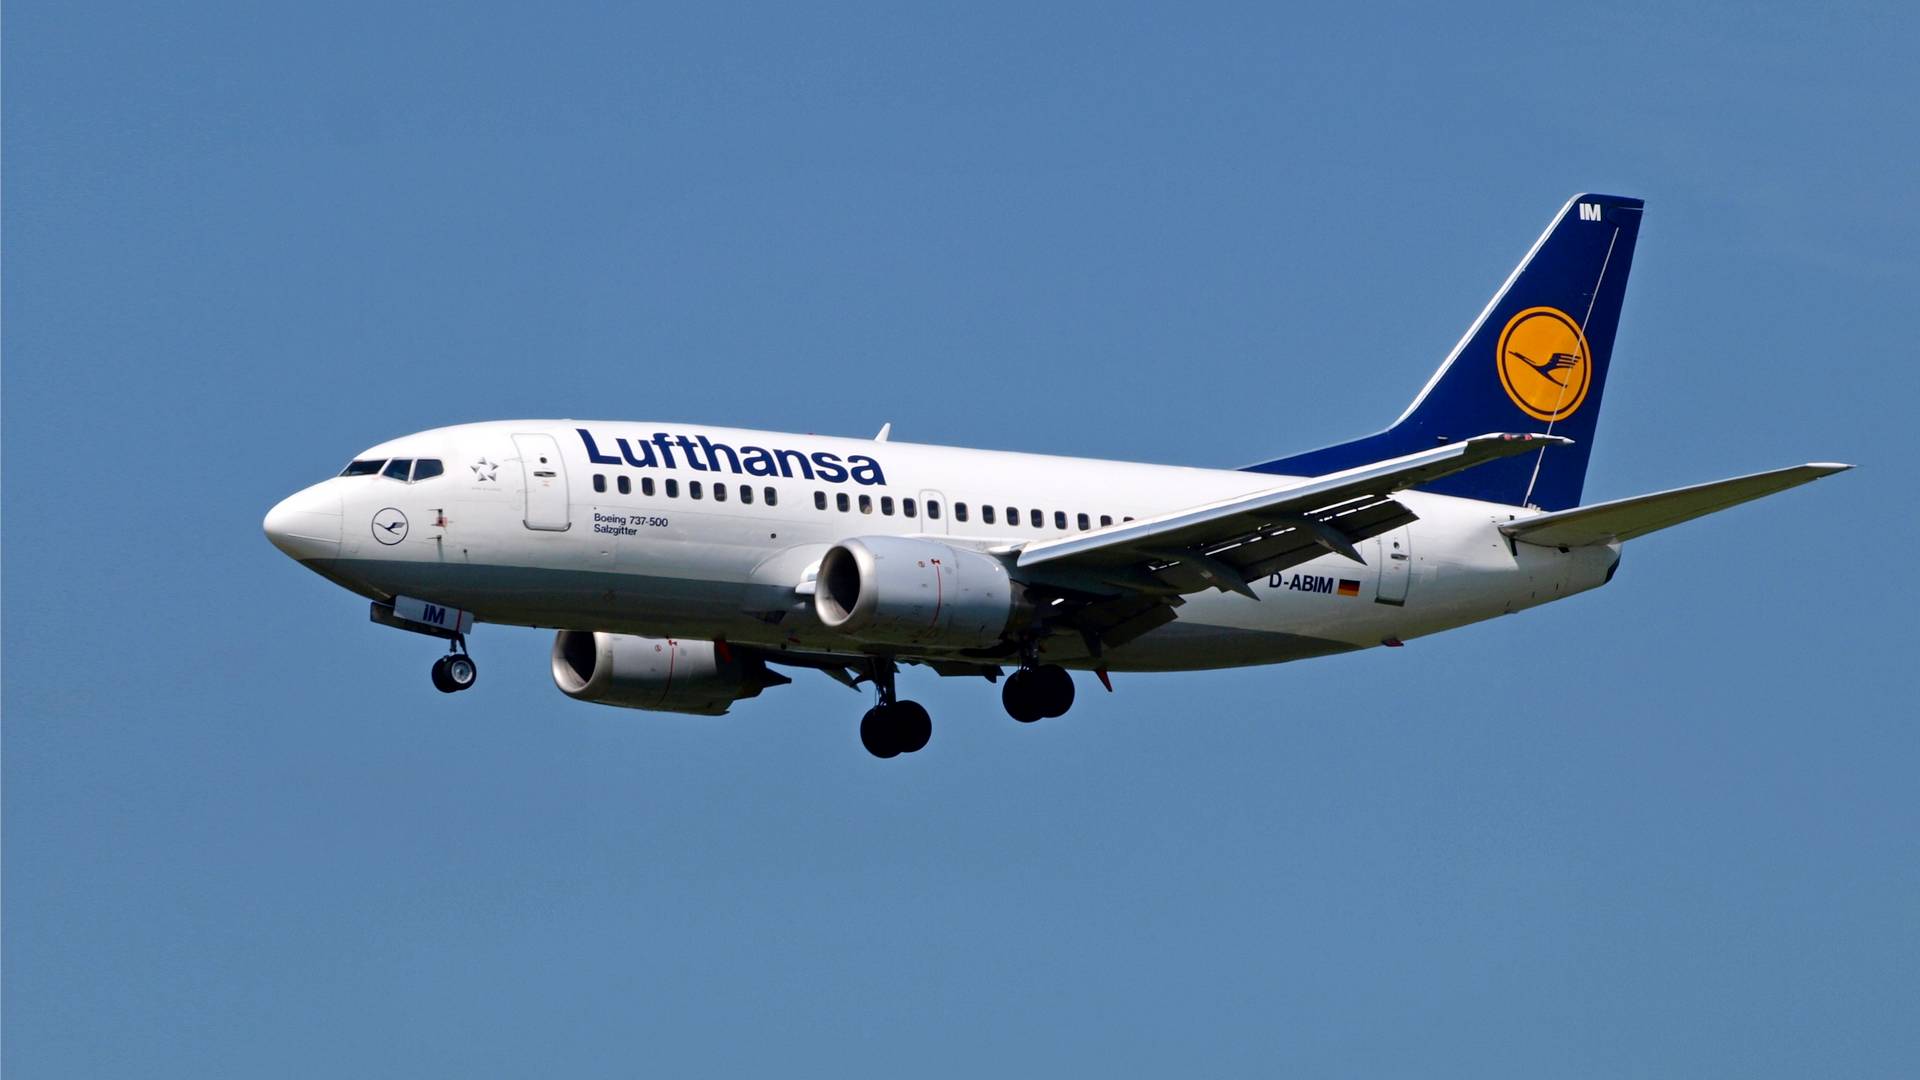 Could Lufthansa Return The 737 To Its Fleet?